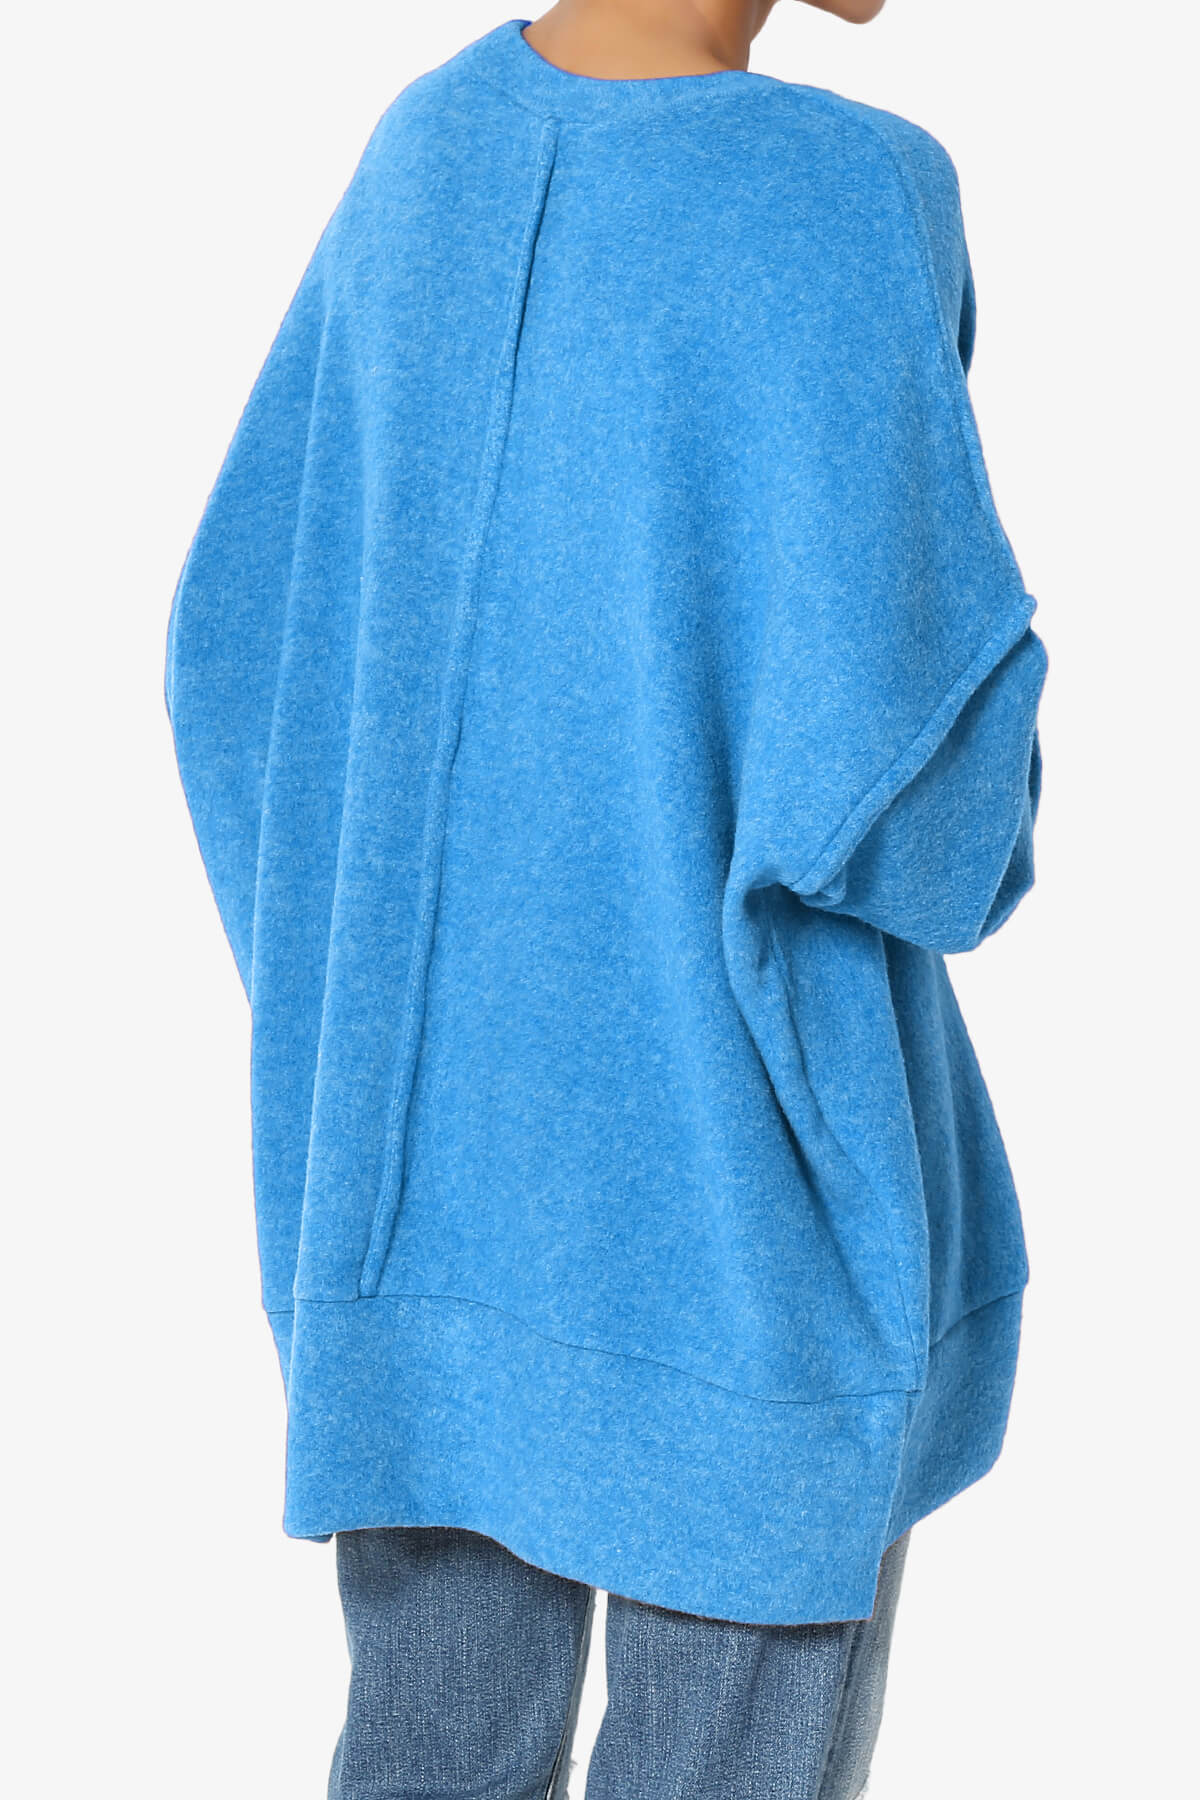 Load image into Gallery viewer, Breccan Blushed Knit Oversized Sweater OCEAN BLUE_4
